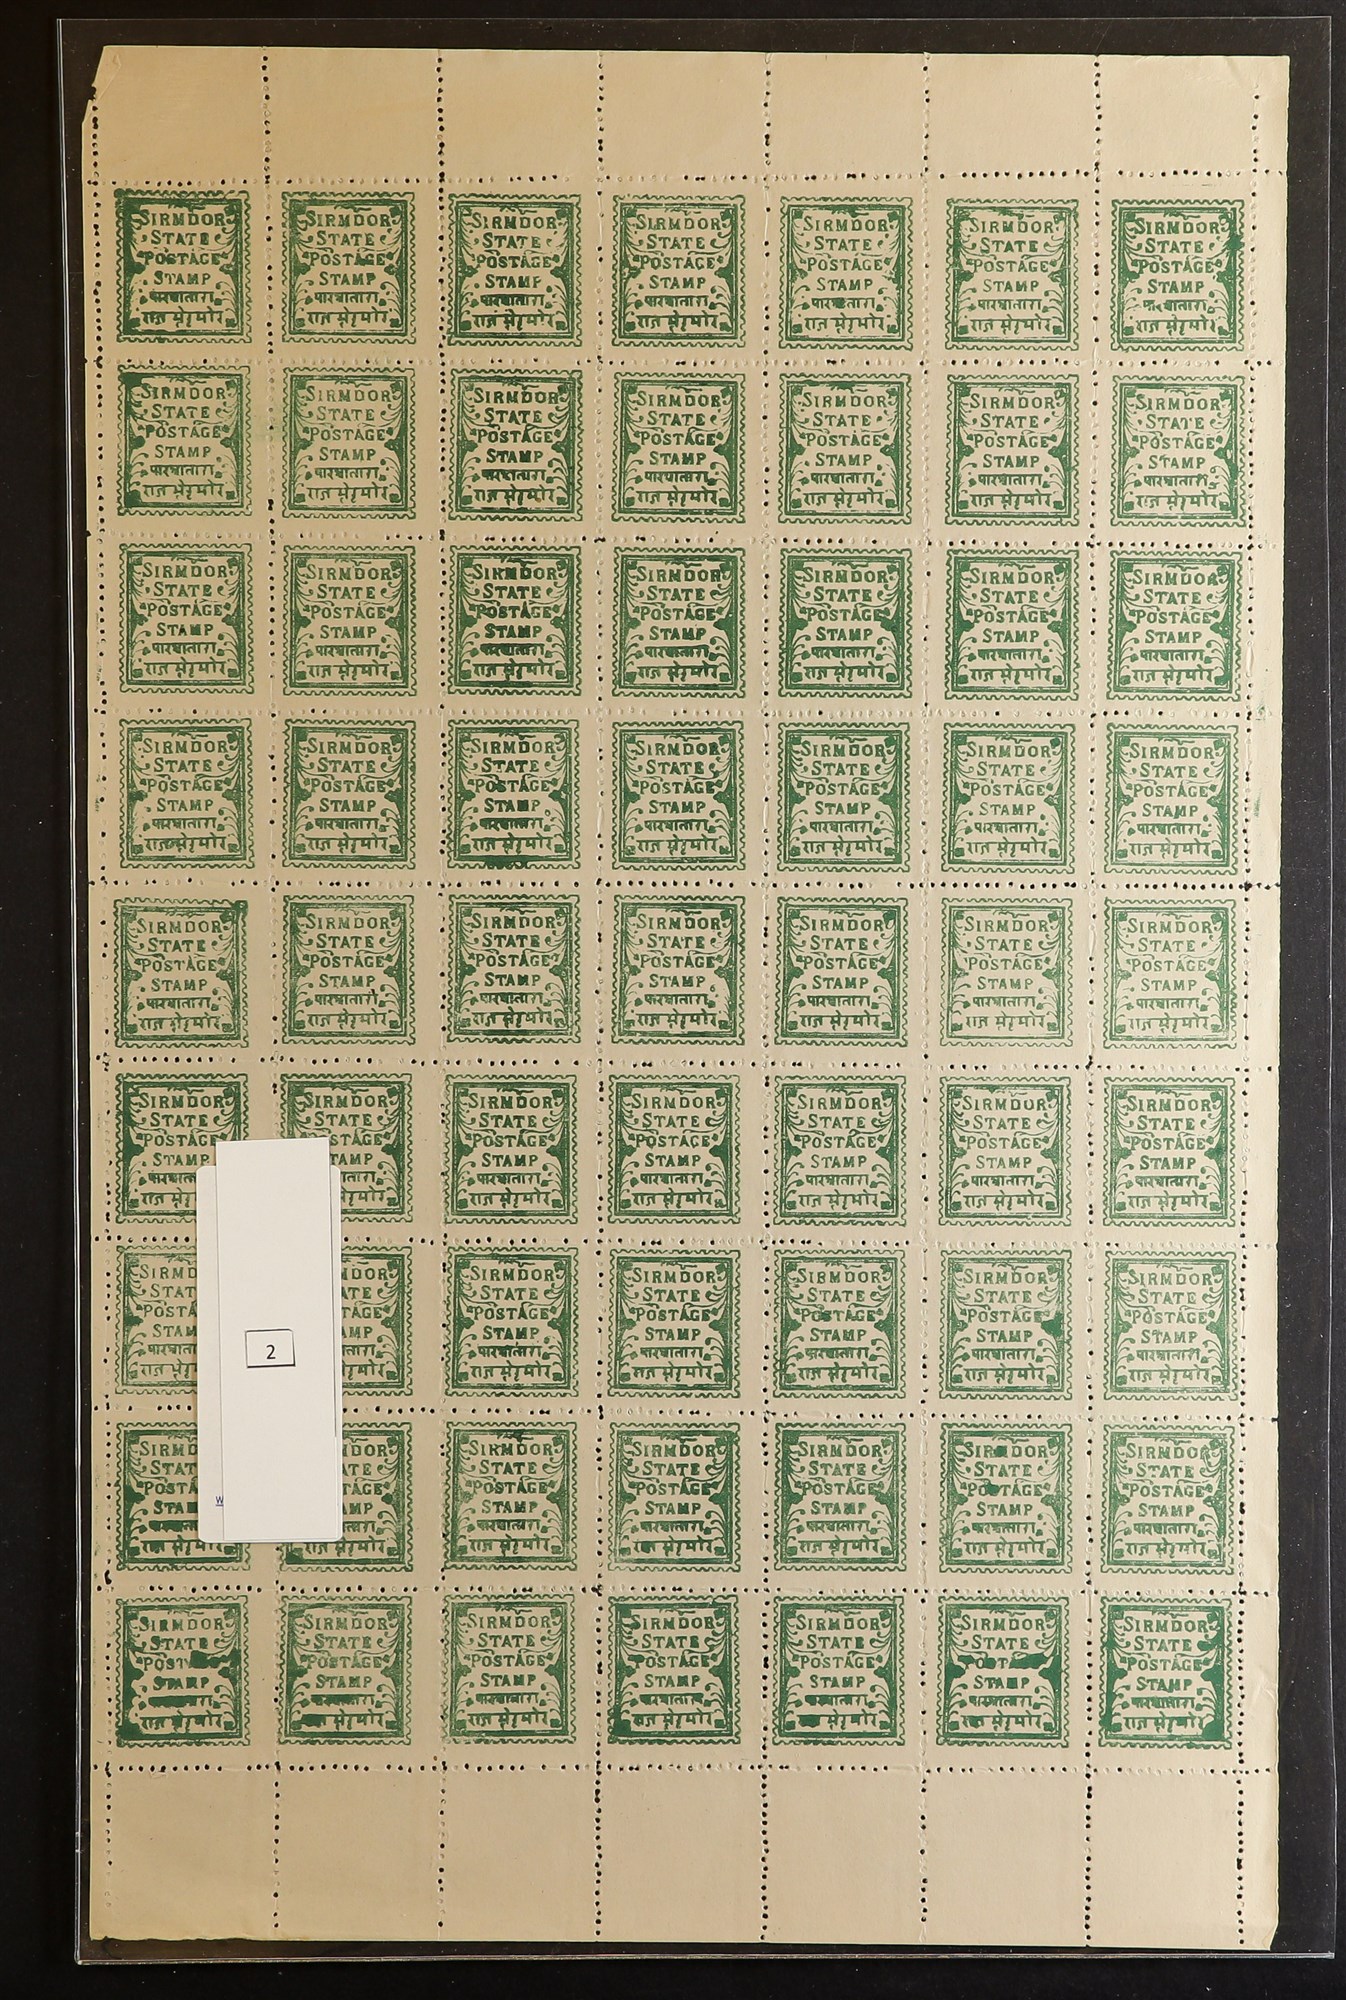 INDIAN FEUDATORY STATES ASSORTMENT on 2 album pages includes used multiples from Jammu and - Image 4 of 4